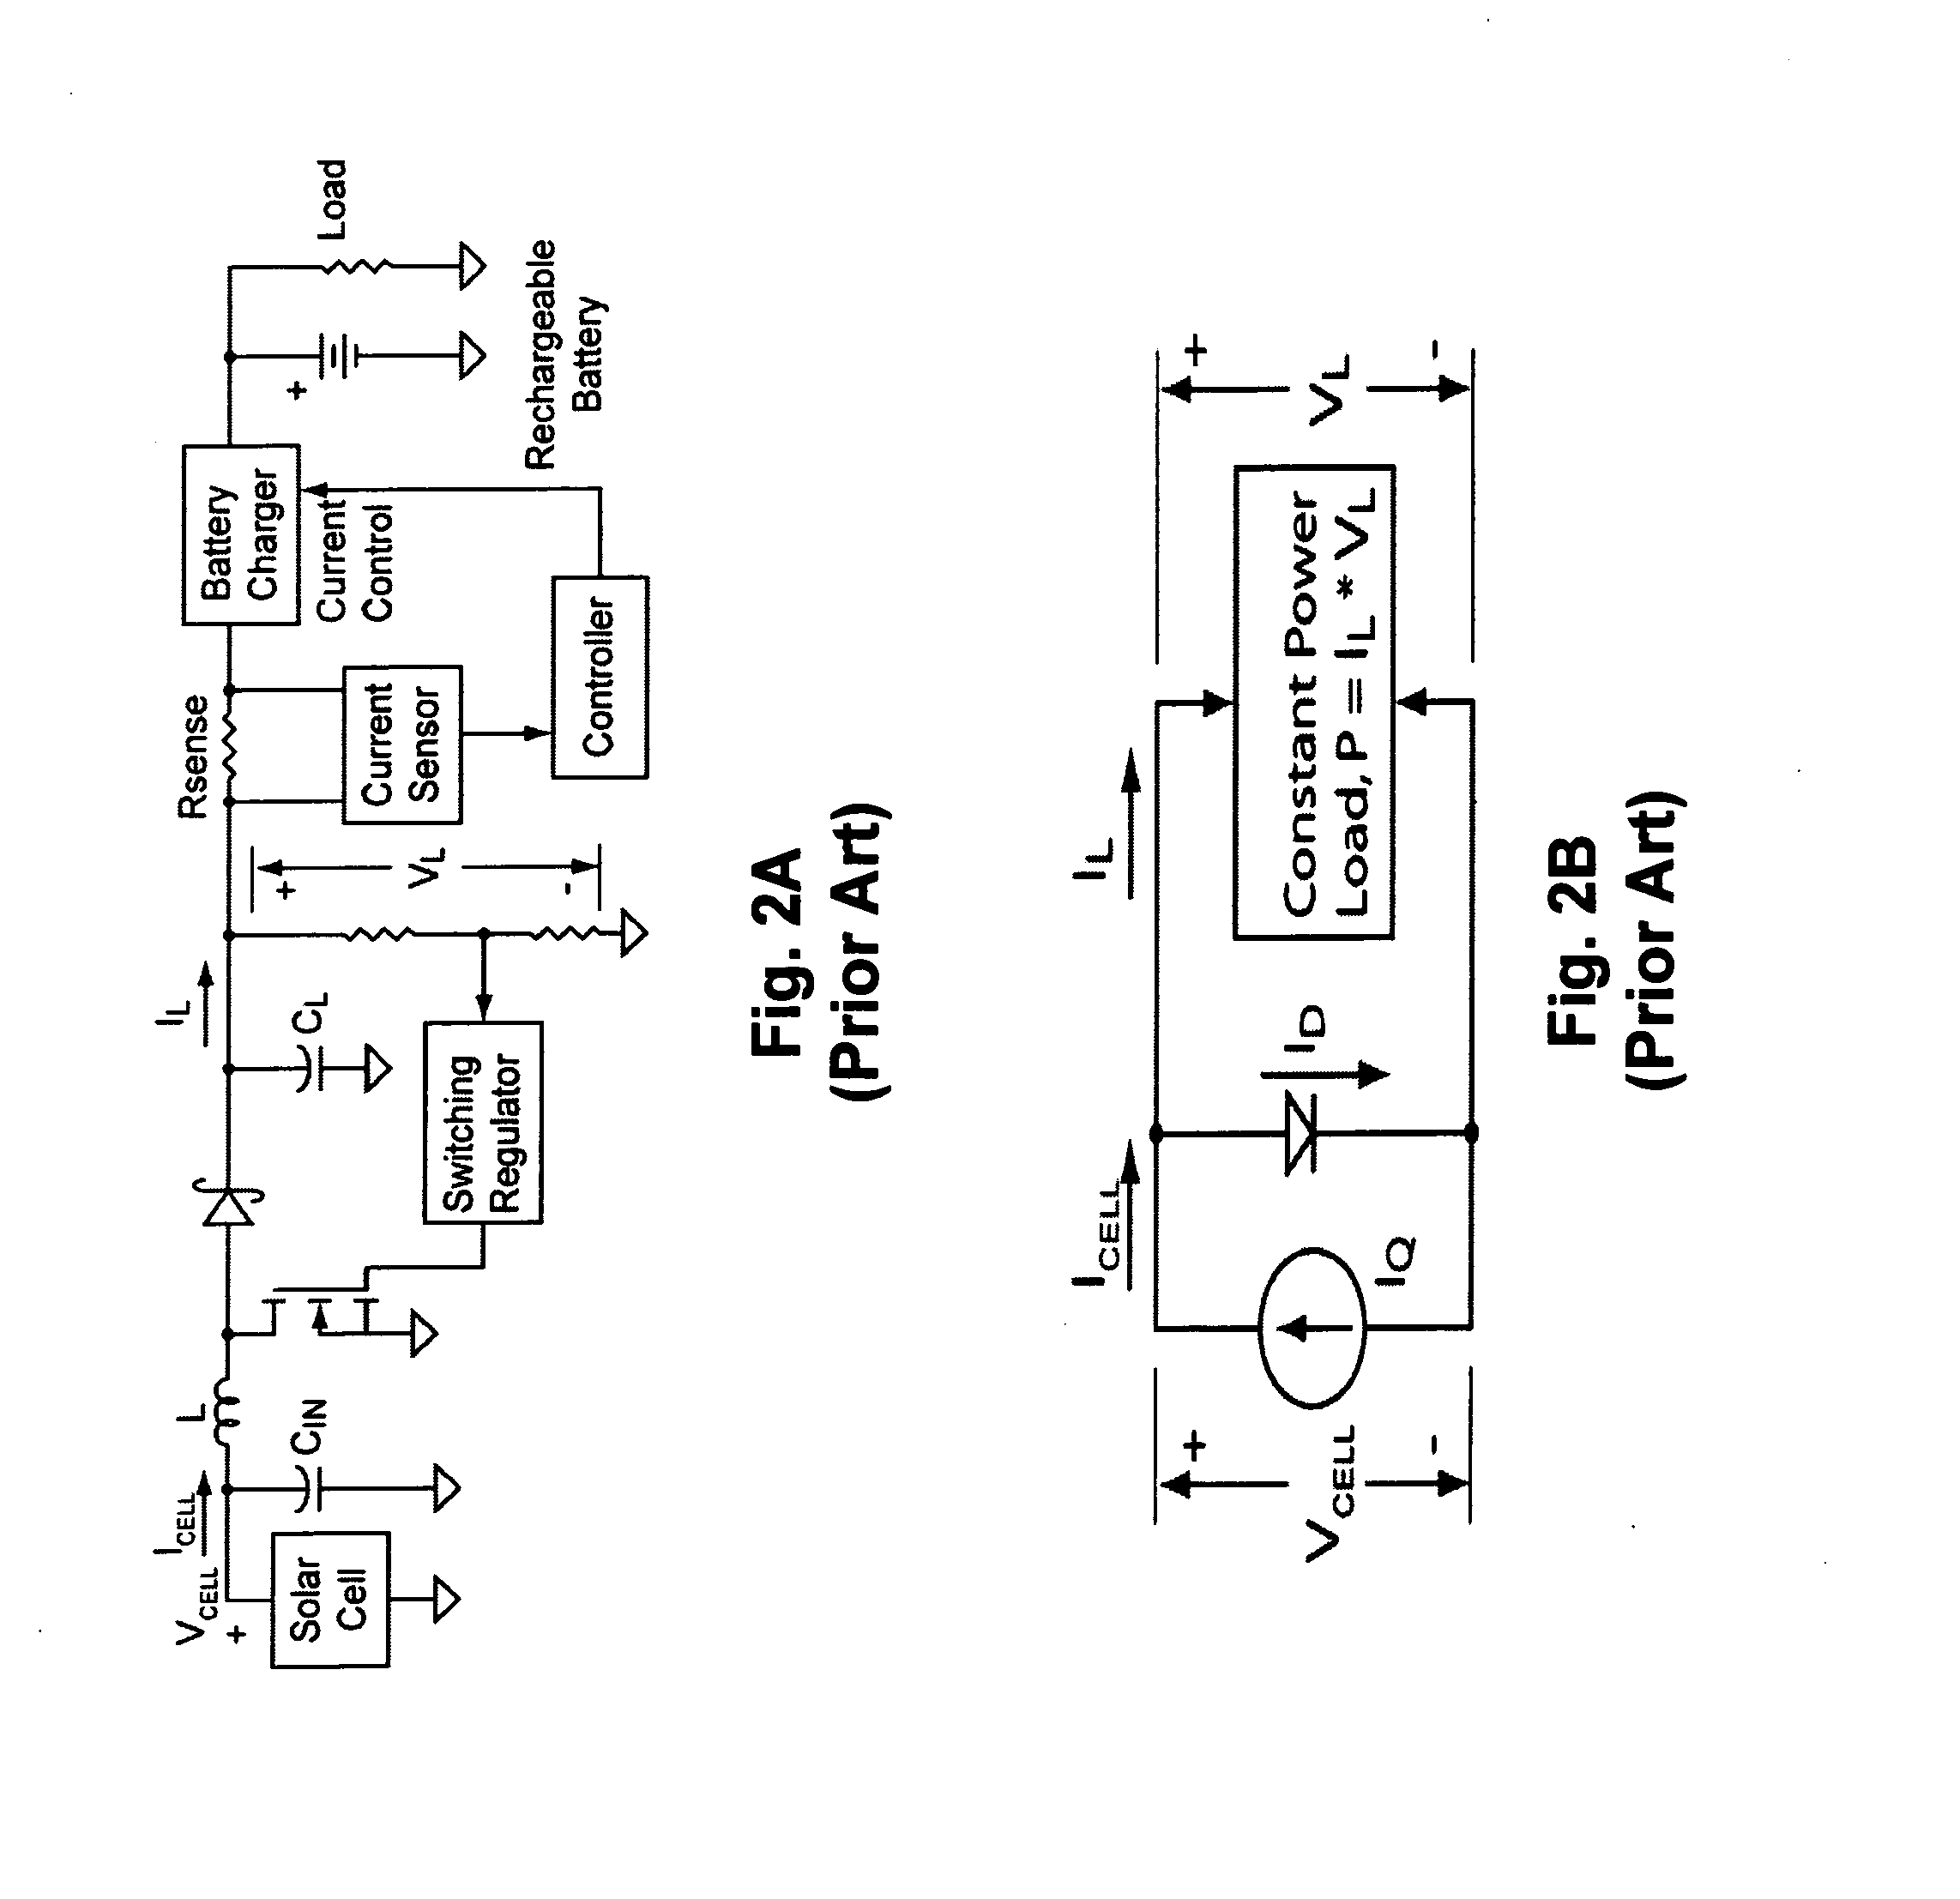 Methods and apparatuses for operating devices with solar power